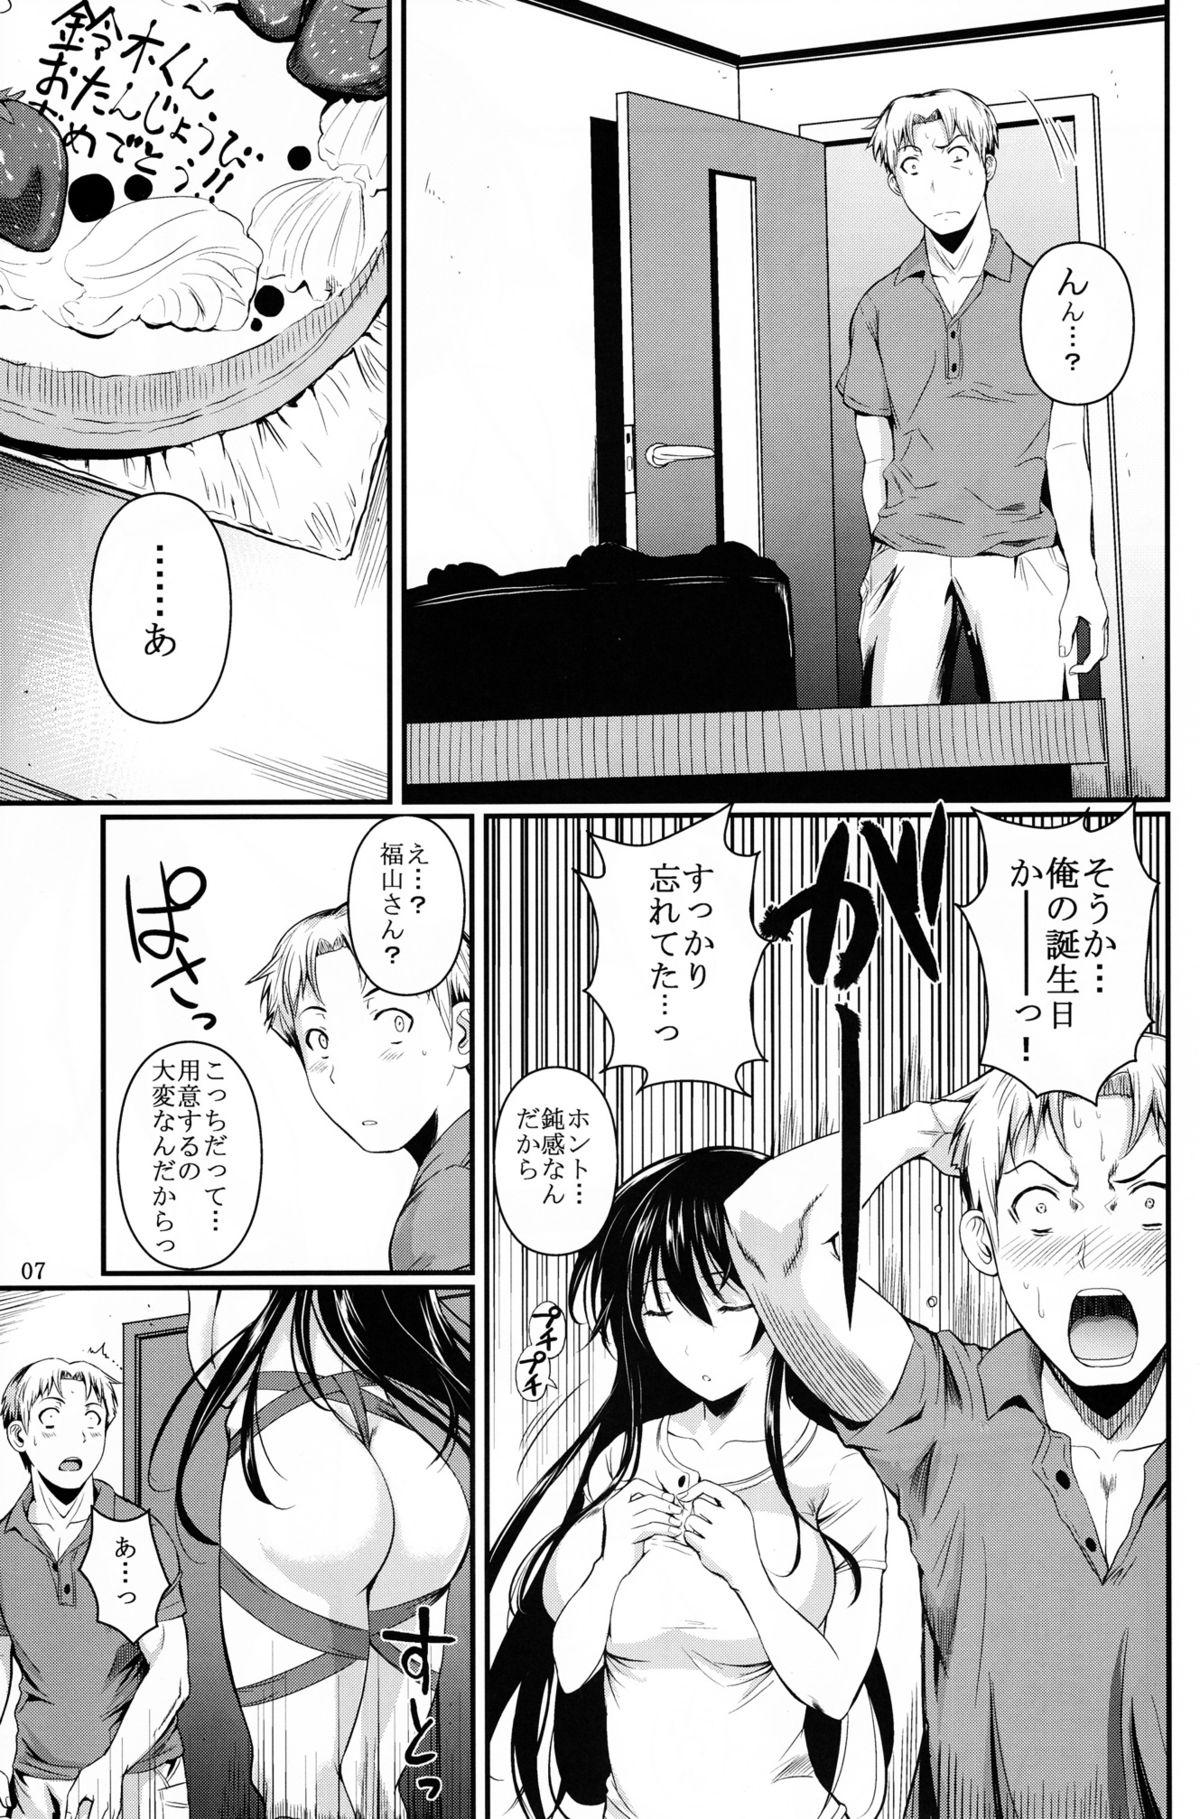 Outdoor Fukuyama-san 7 From - Page 7